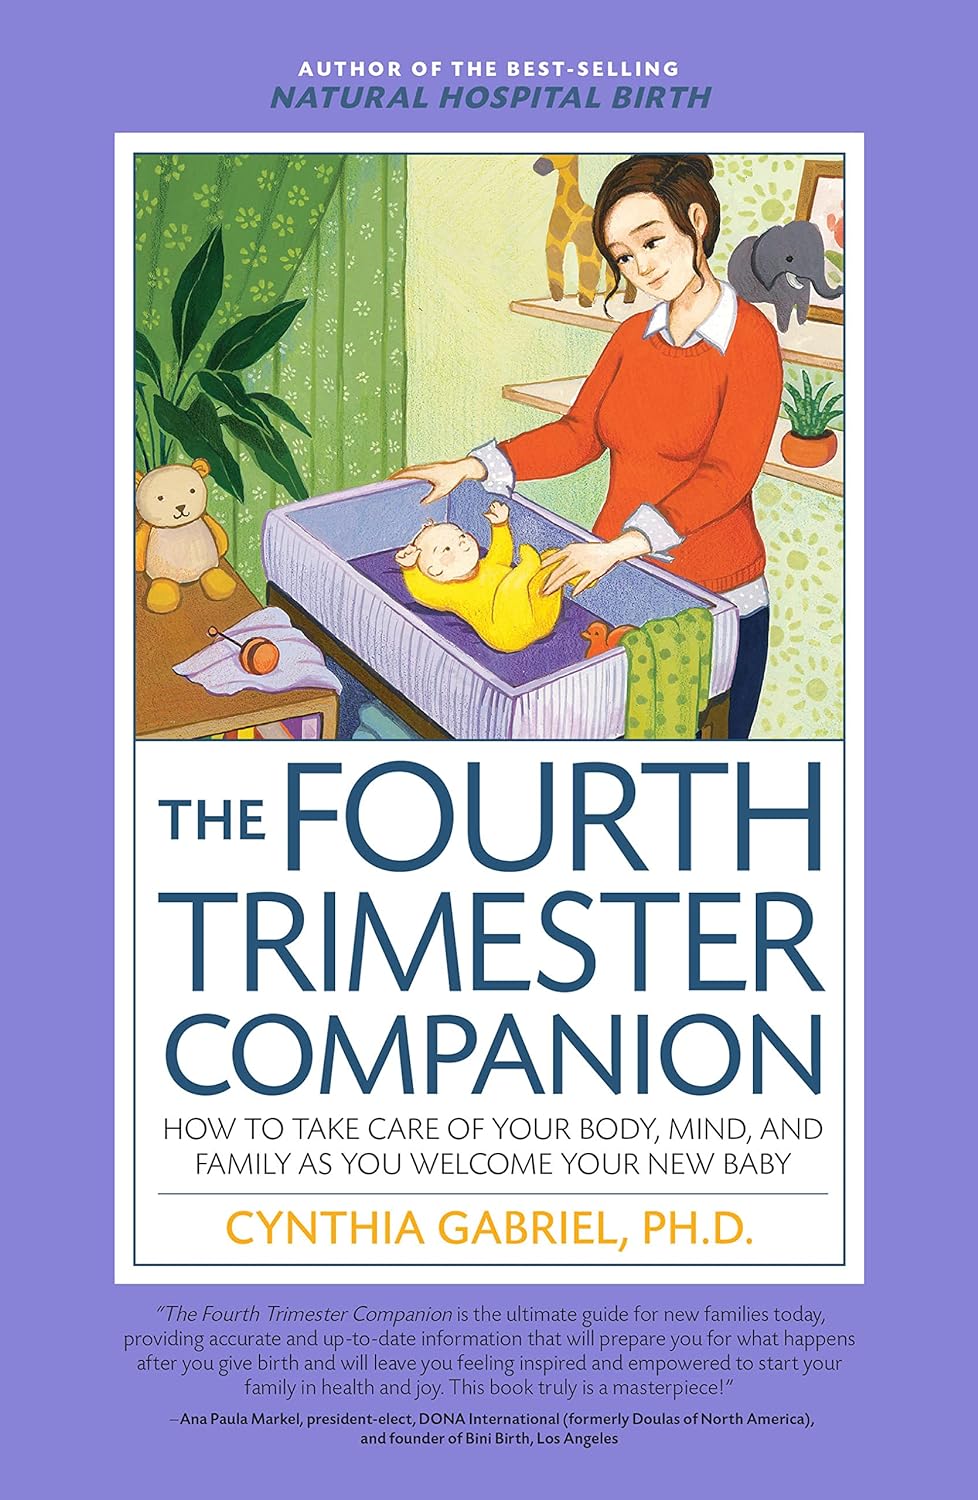 The Fourth Trimester Companion: How to Take Care of Your Body, Mind, and Family as You Welcome Your New Baby     Paperback – December 26, 2017